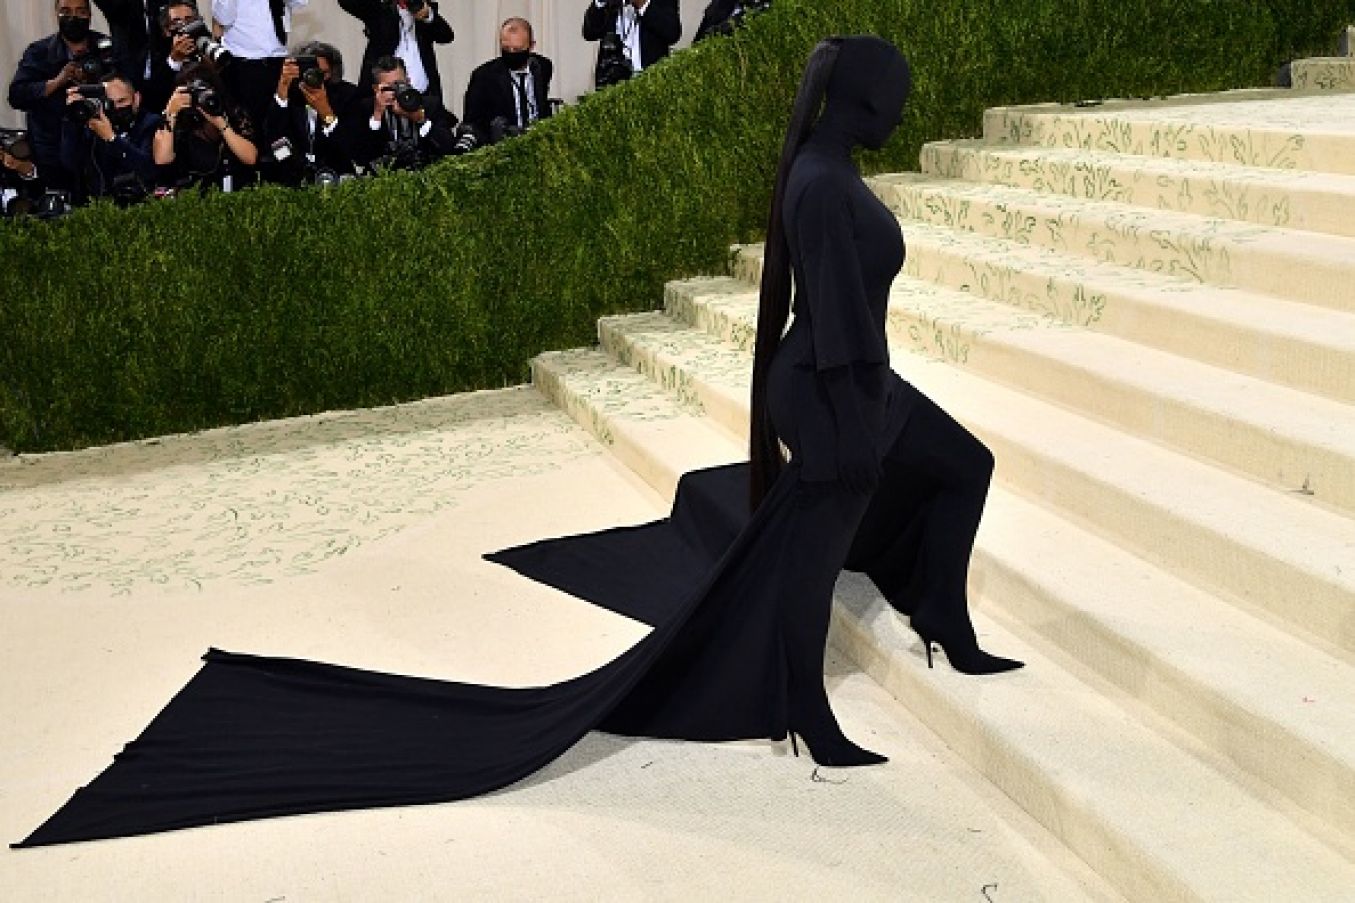 Us Socialite Kim Kardashian Arrives For The 2021 Met Gala In New York. Photo: Angela Weiss/Afp Via Getty Images